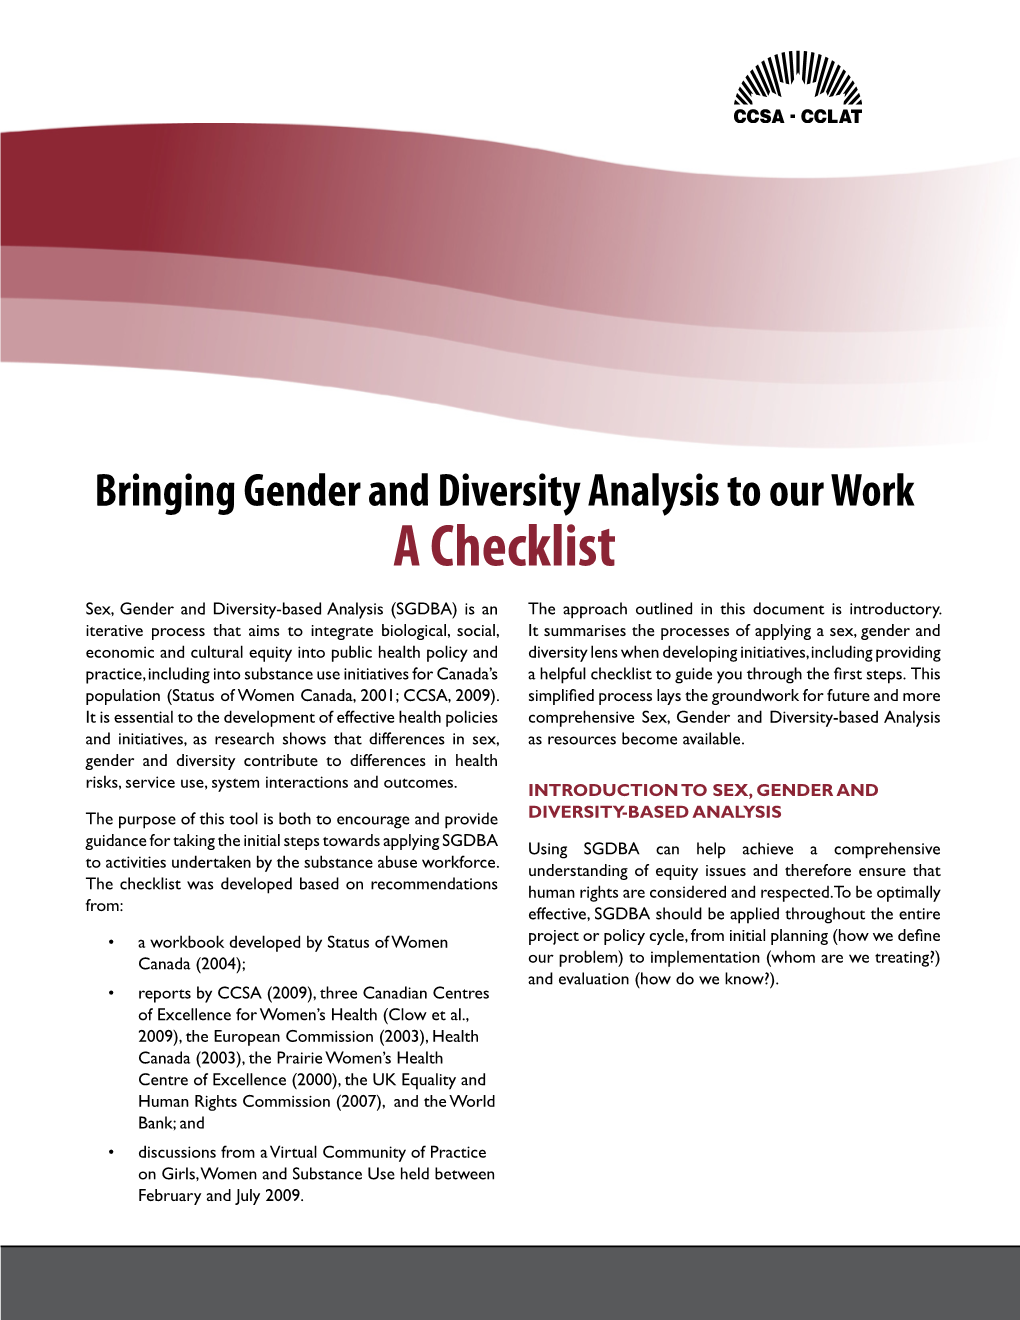 Bringing Gender and Diversity Analysis to Our Work: a Checklist